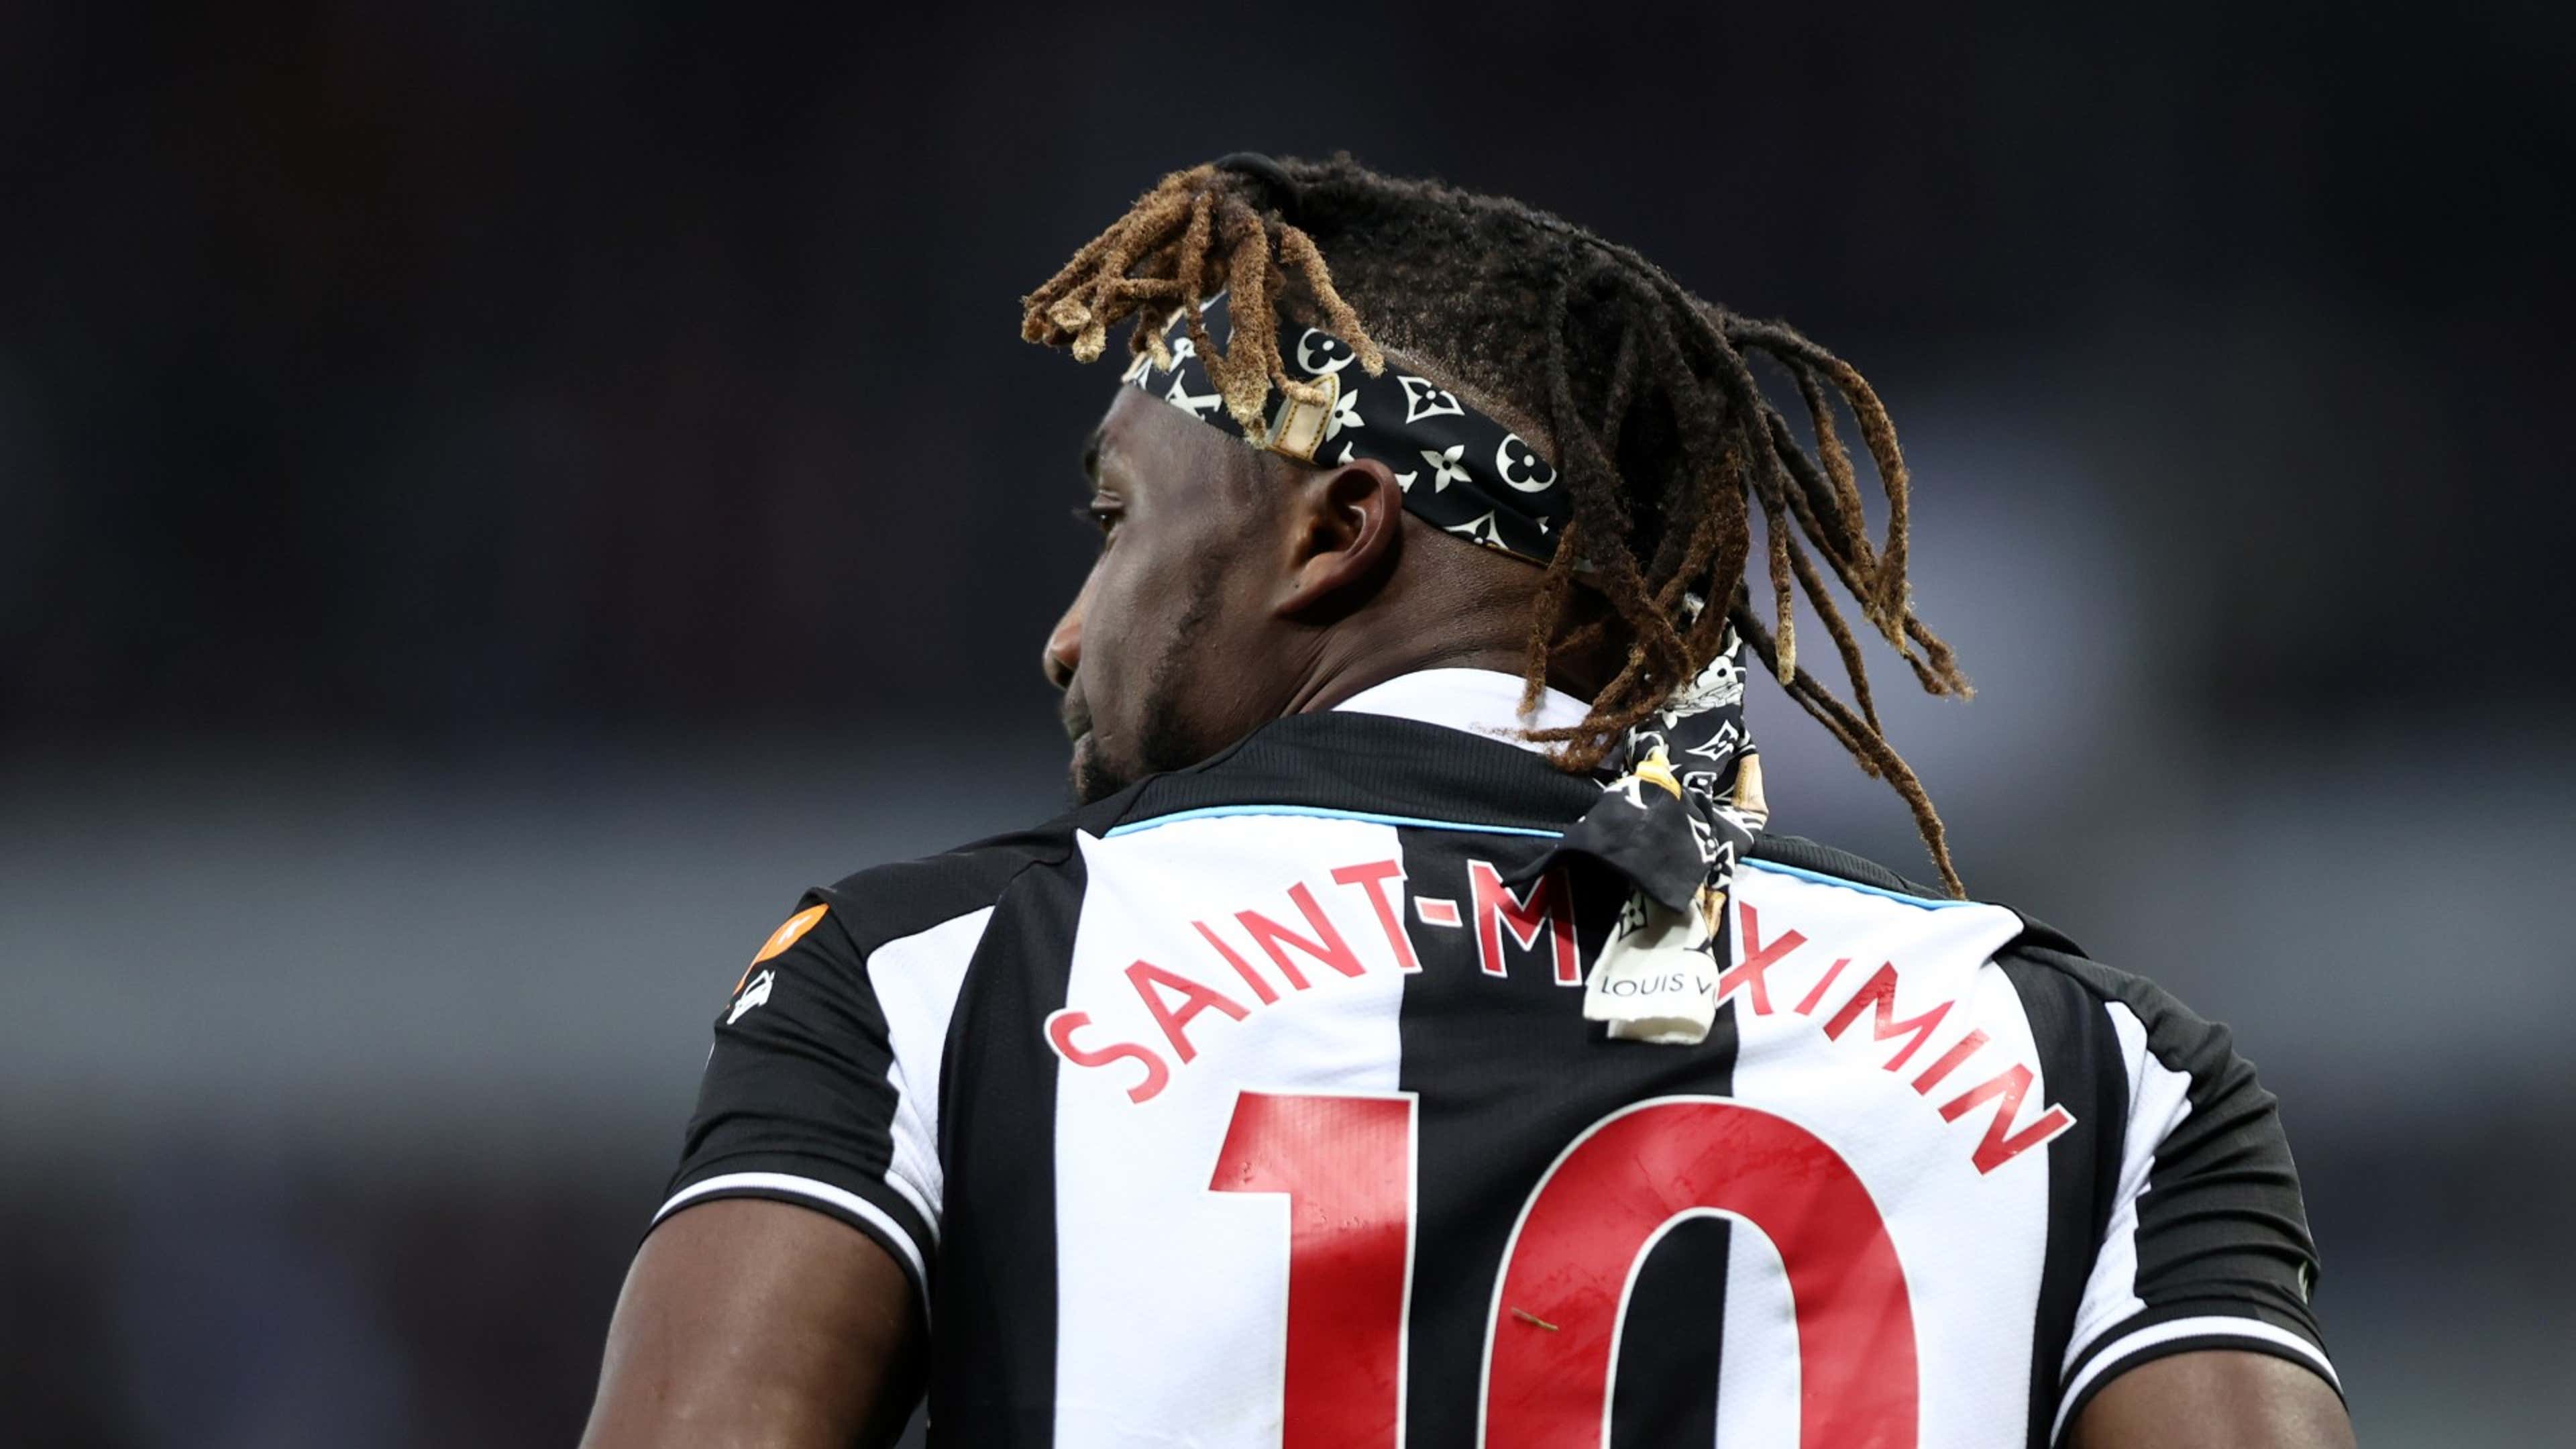 Newcastle star Saint-Maximin charged by FA for wearing Louis Vuitton  headband